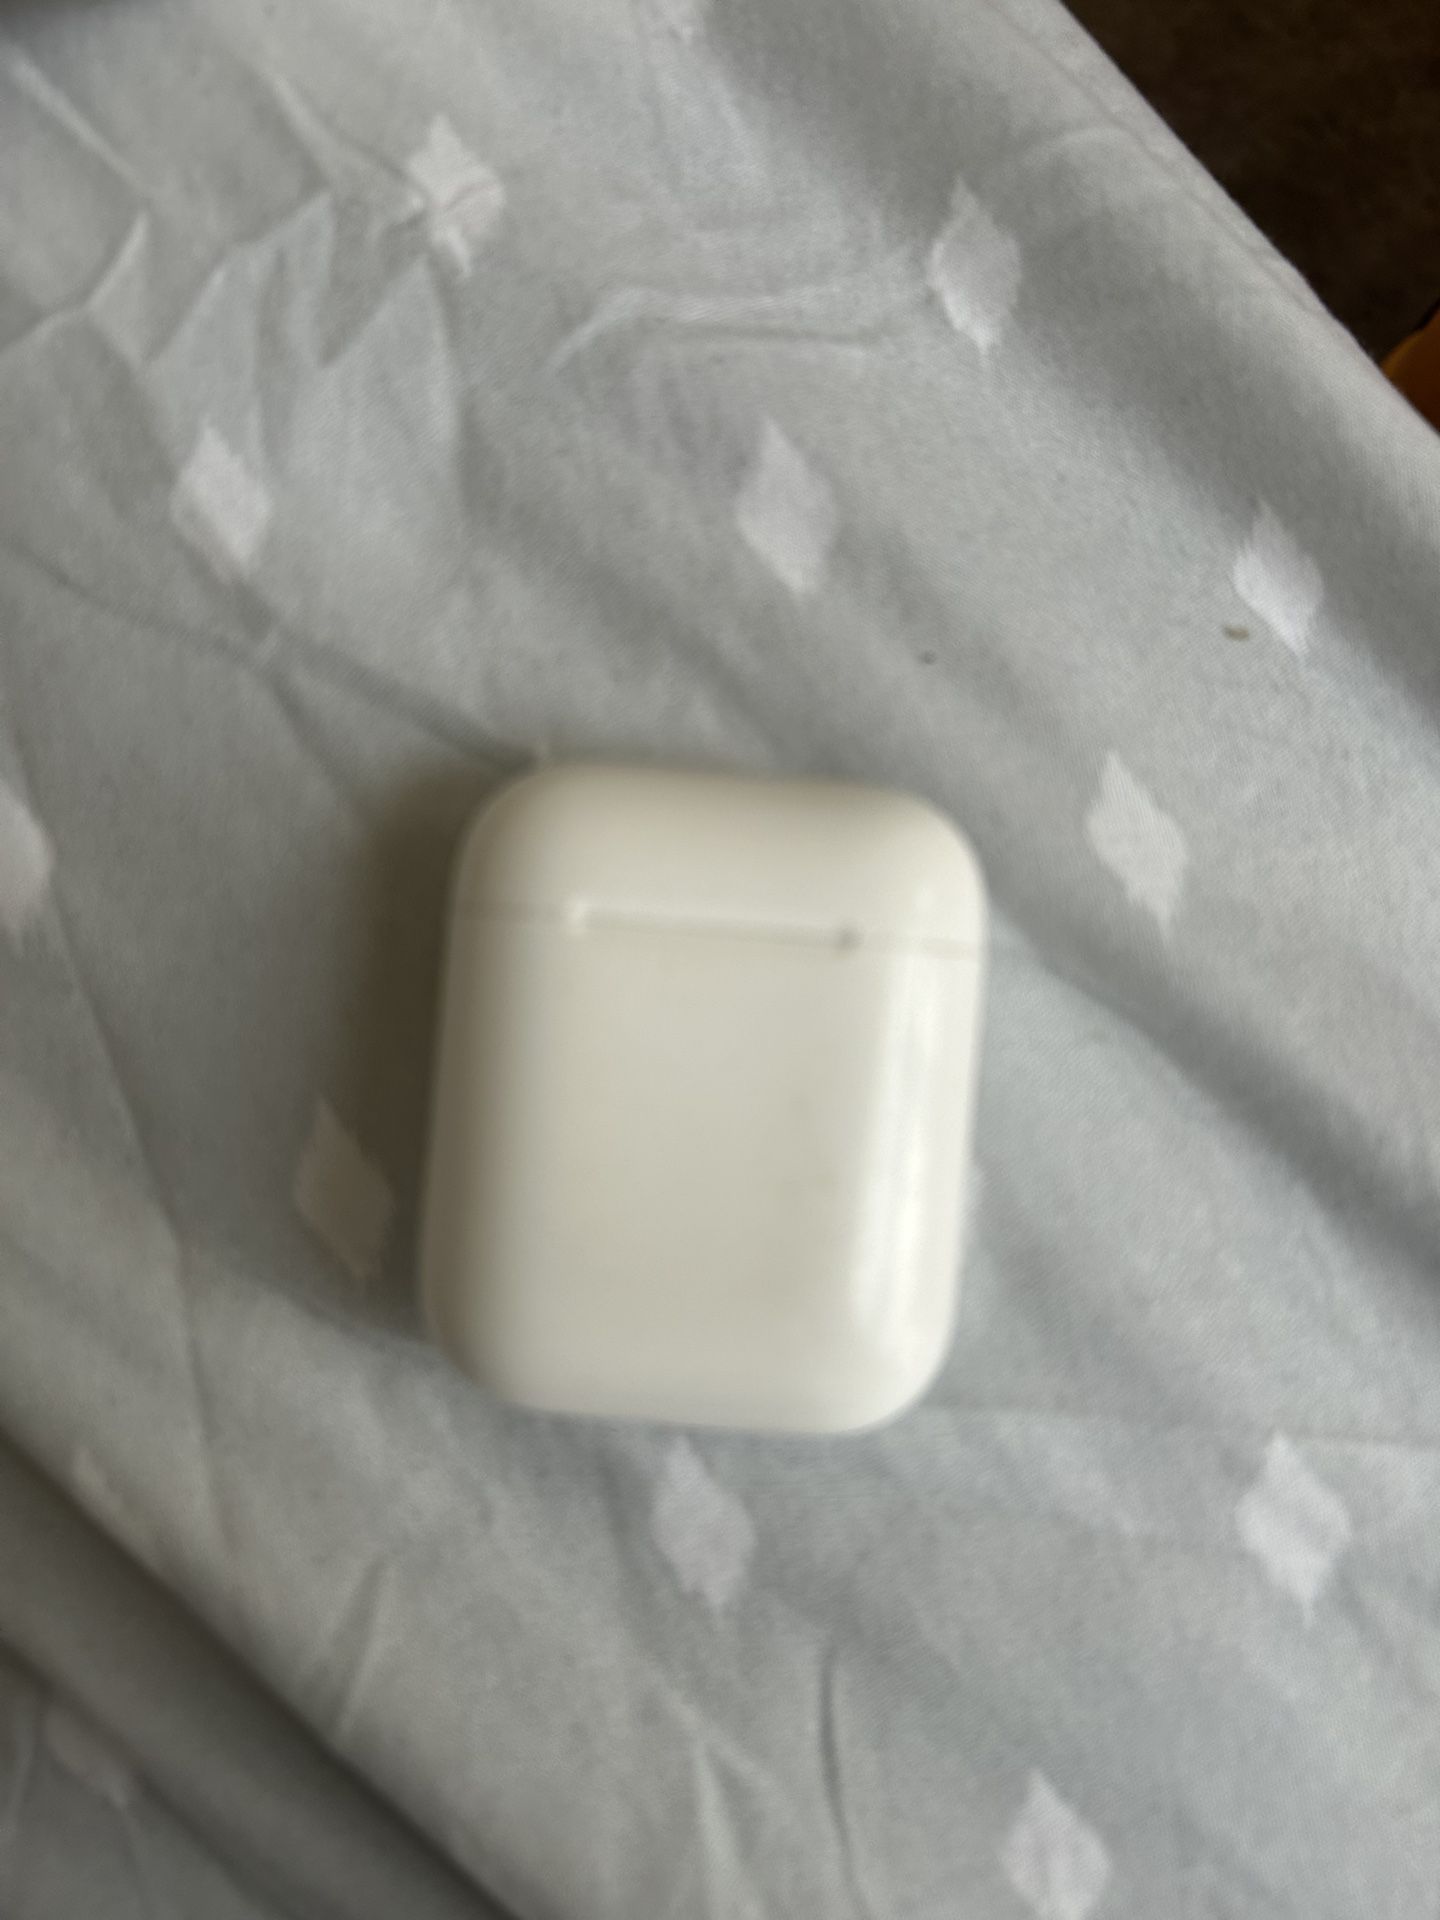 airpod charging case (airpods not included) 